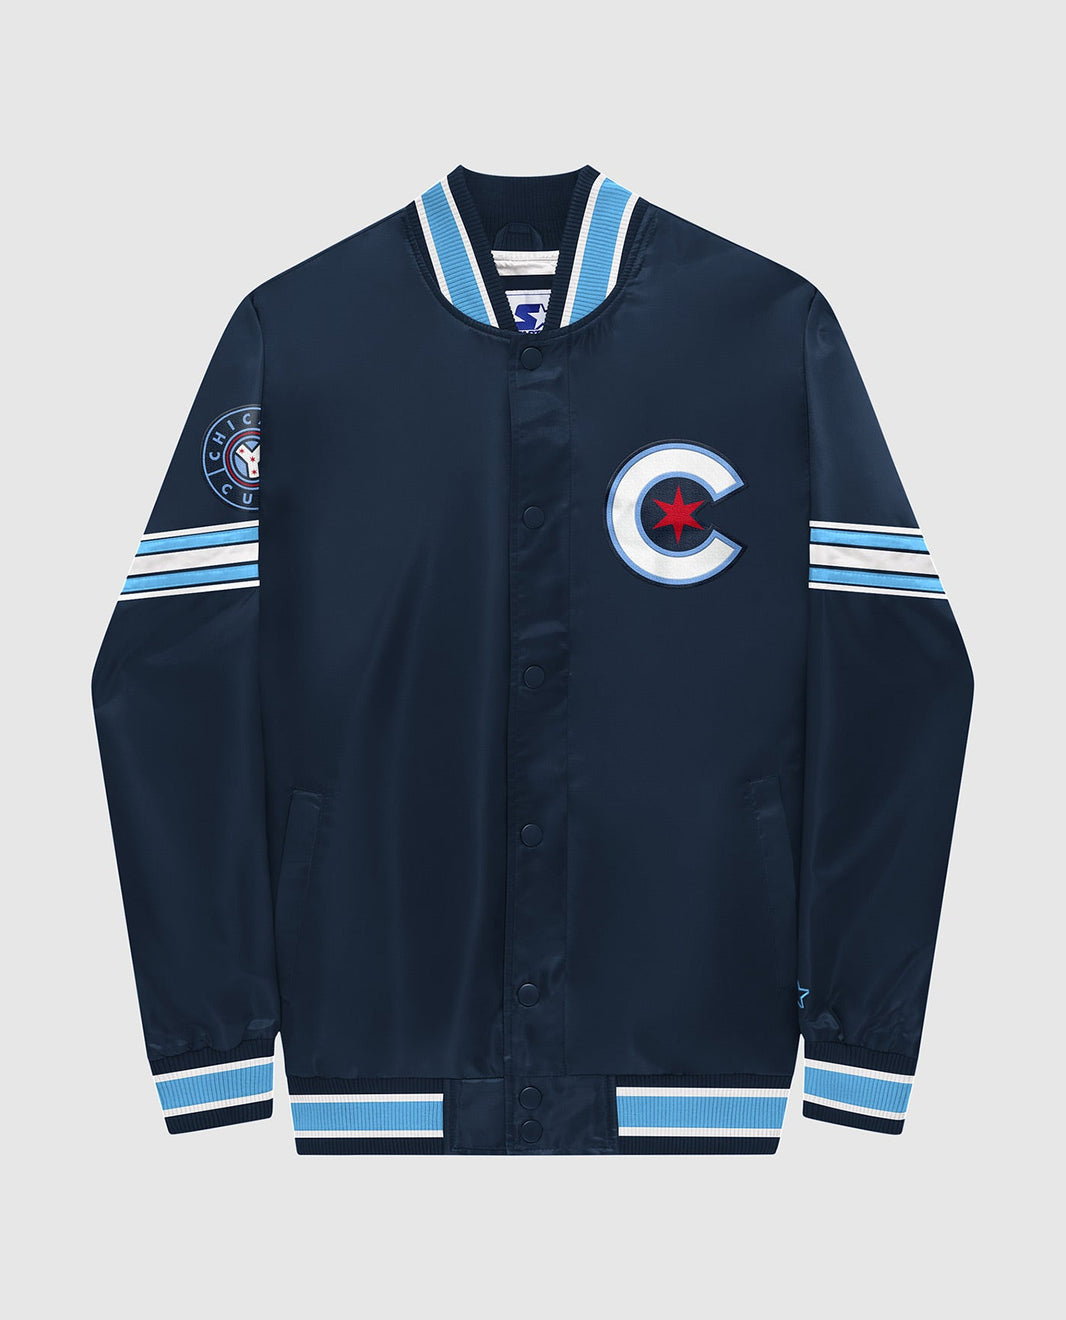 STARTER Jackets and Pullovers | STARTER – Page 5 – Starter